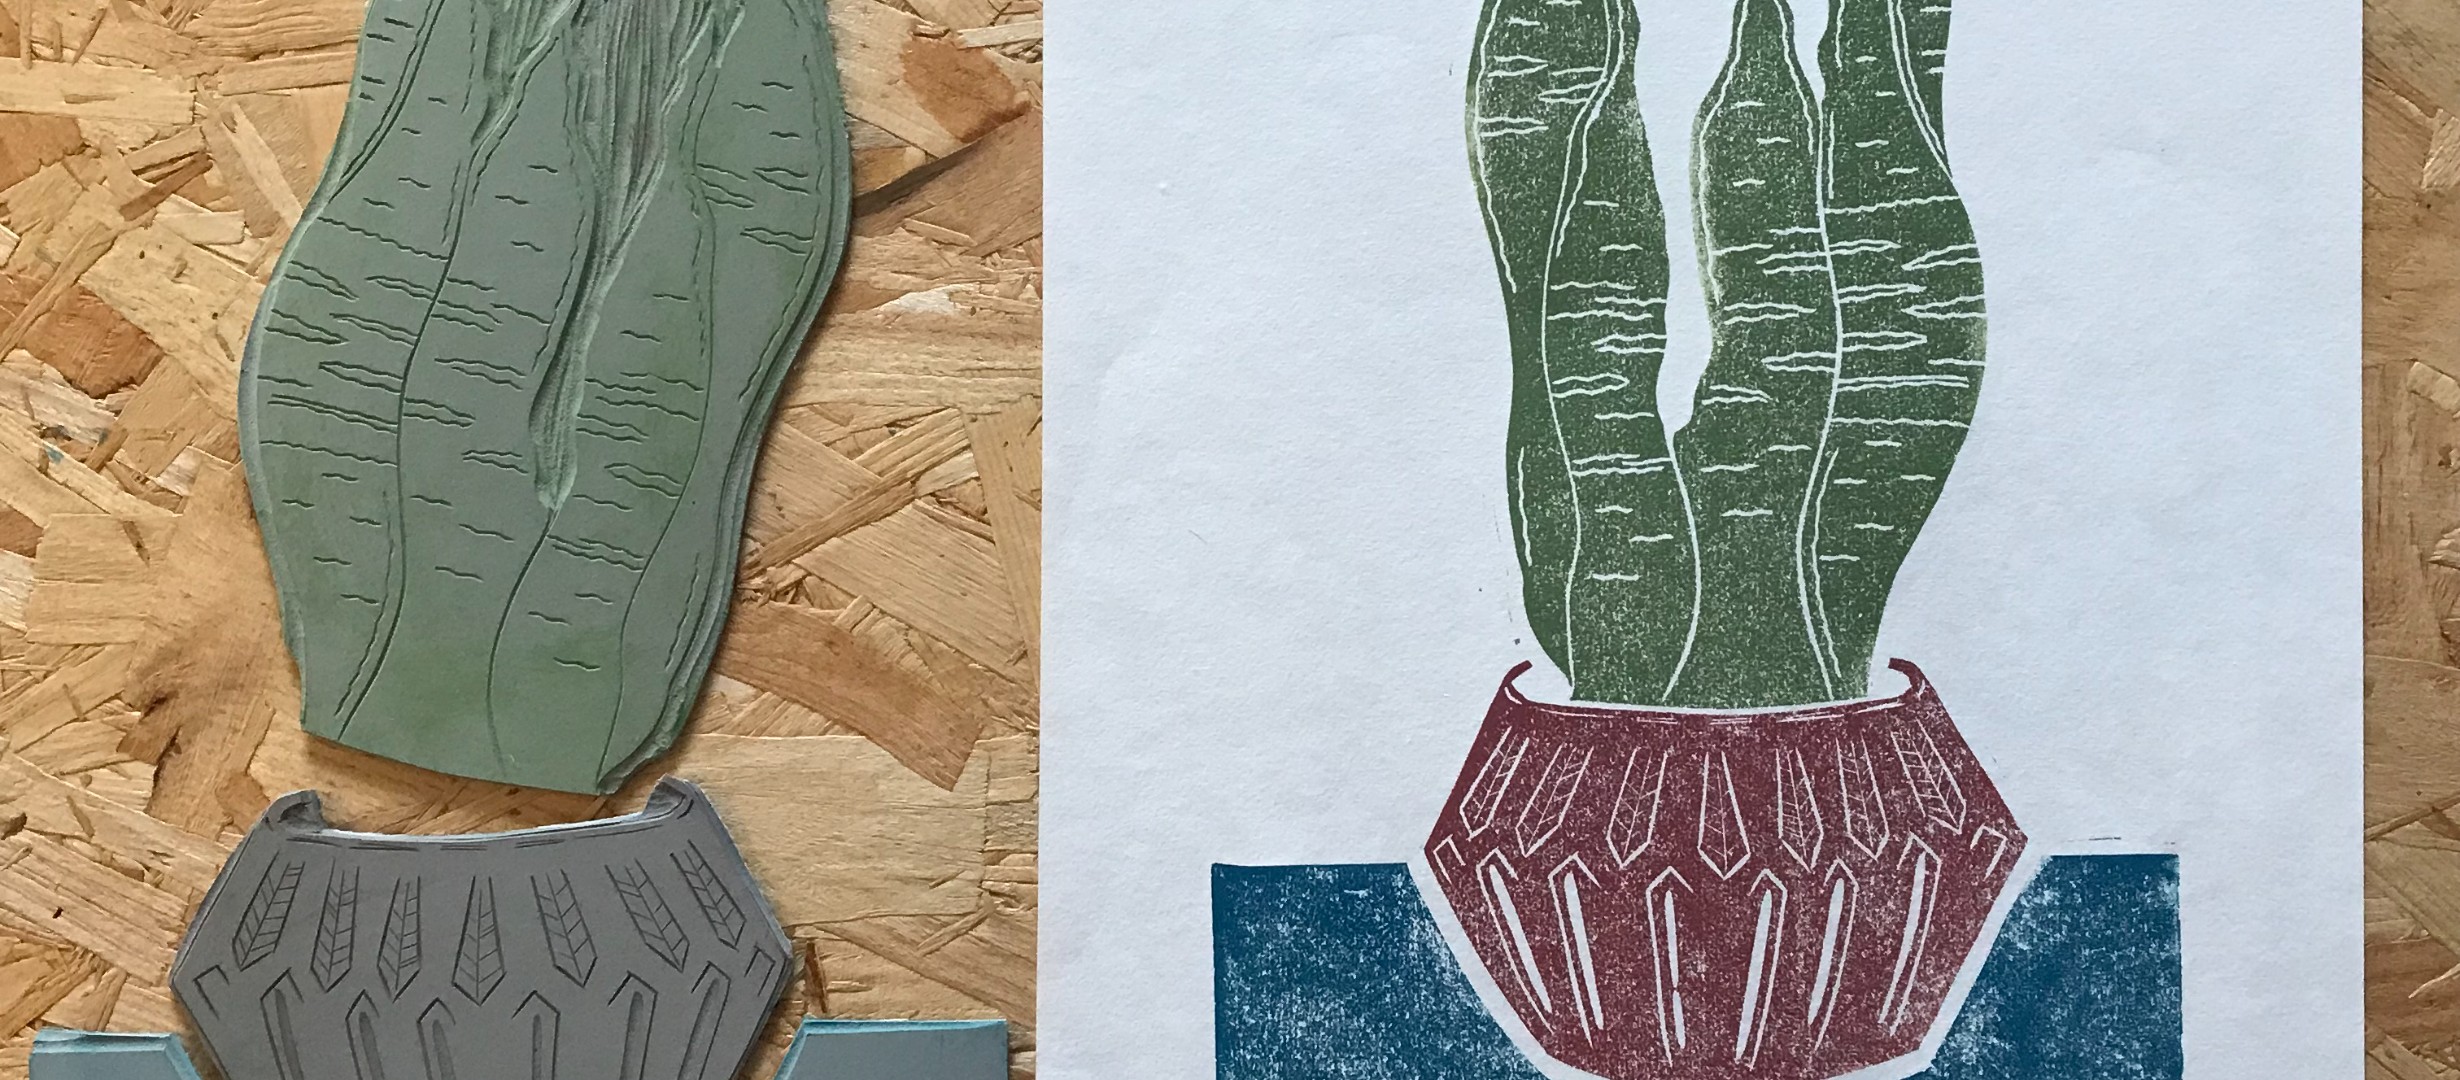 Lino stamp of a canvas in a pot next to a lino print of a green cactus in a red pot on a wooden table